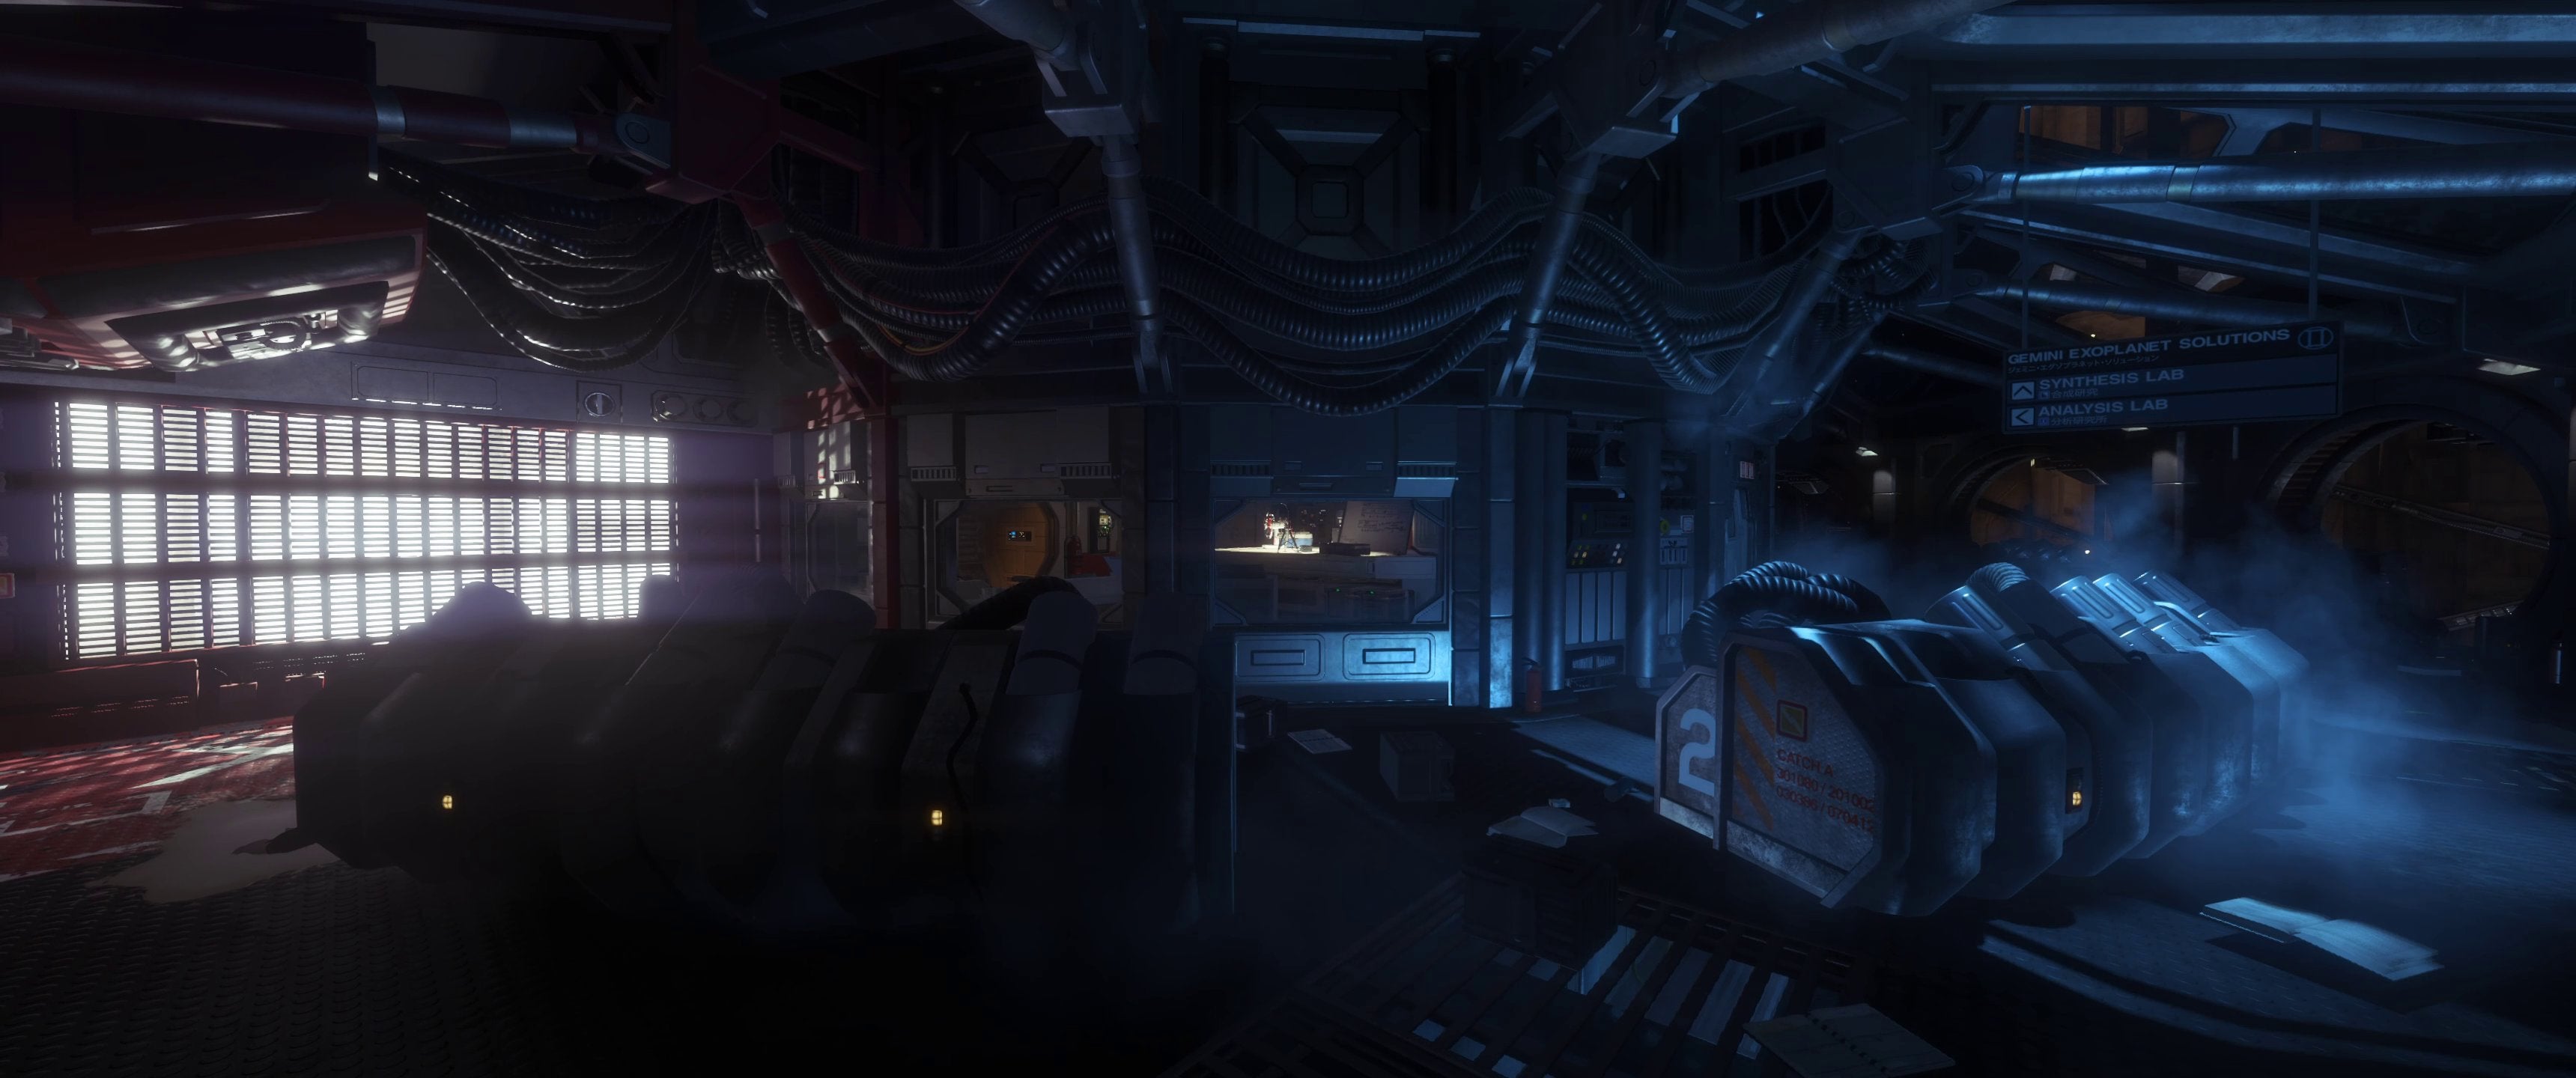 Hooked on the ambiance of Alien Isolation? Me too! That's why I've decided to showcase it with a collection of over 650 live wallpaper for Wallpaper Engine